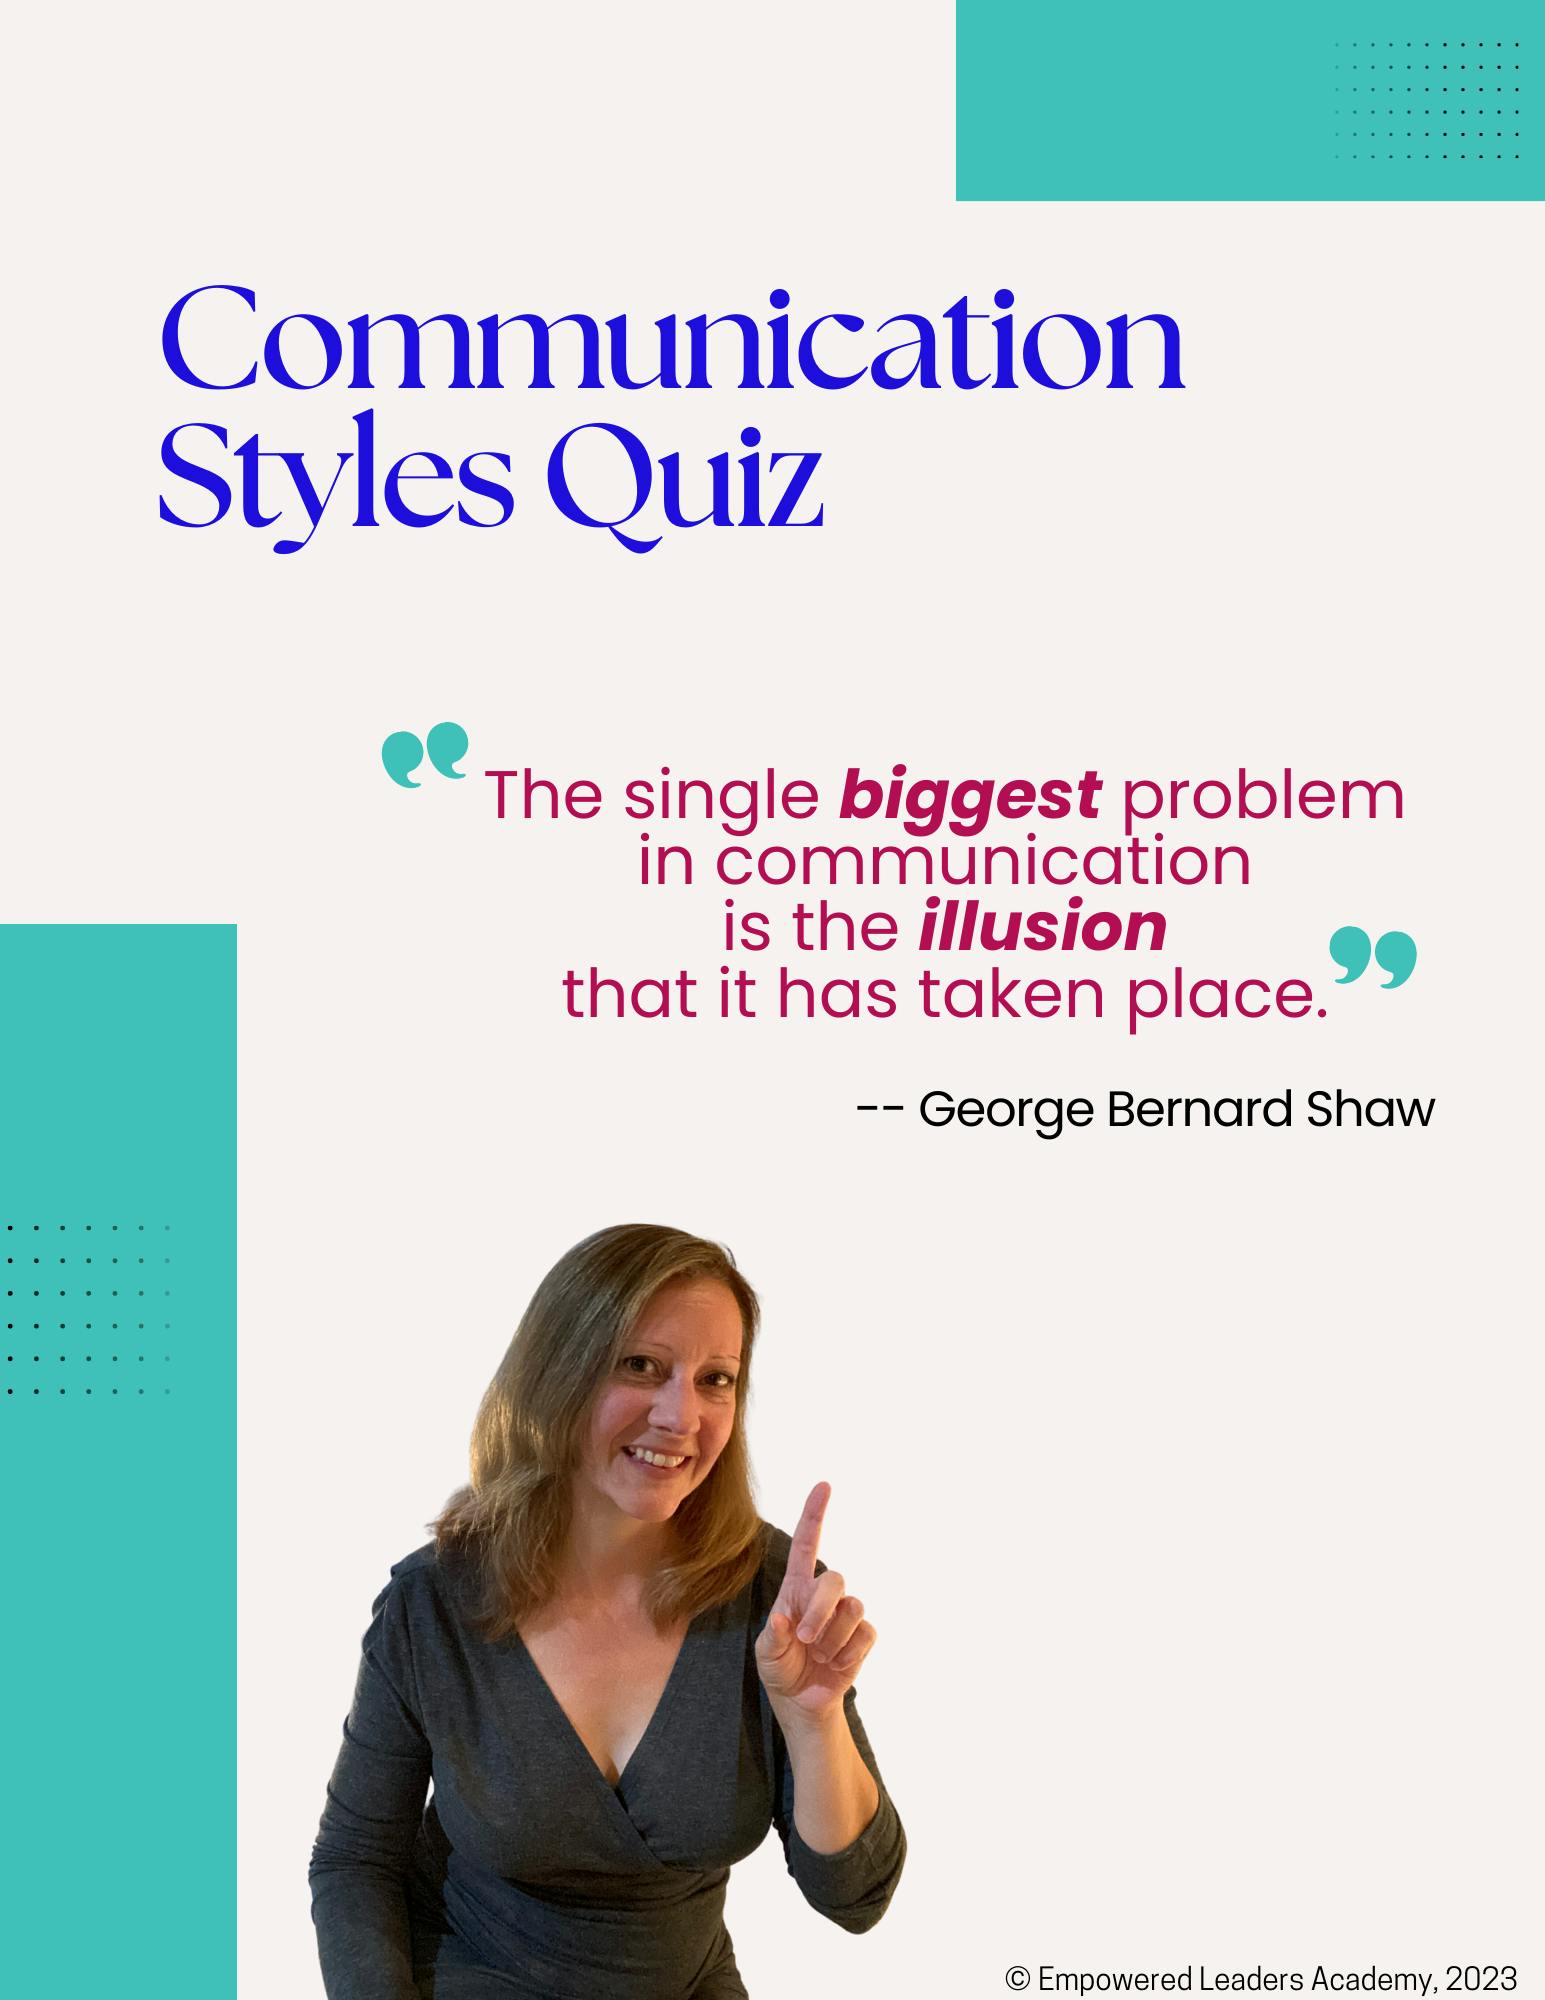 Page 1 of Stephanie's free "Communications Styles Quiz" PDF.